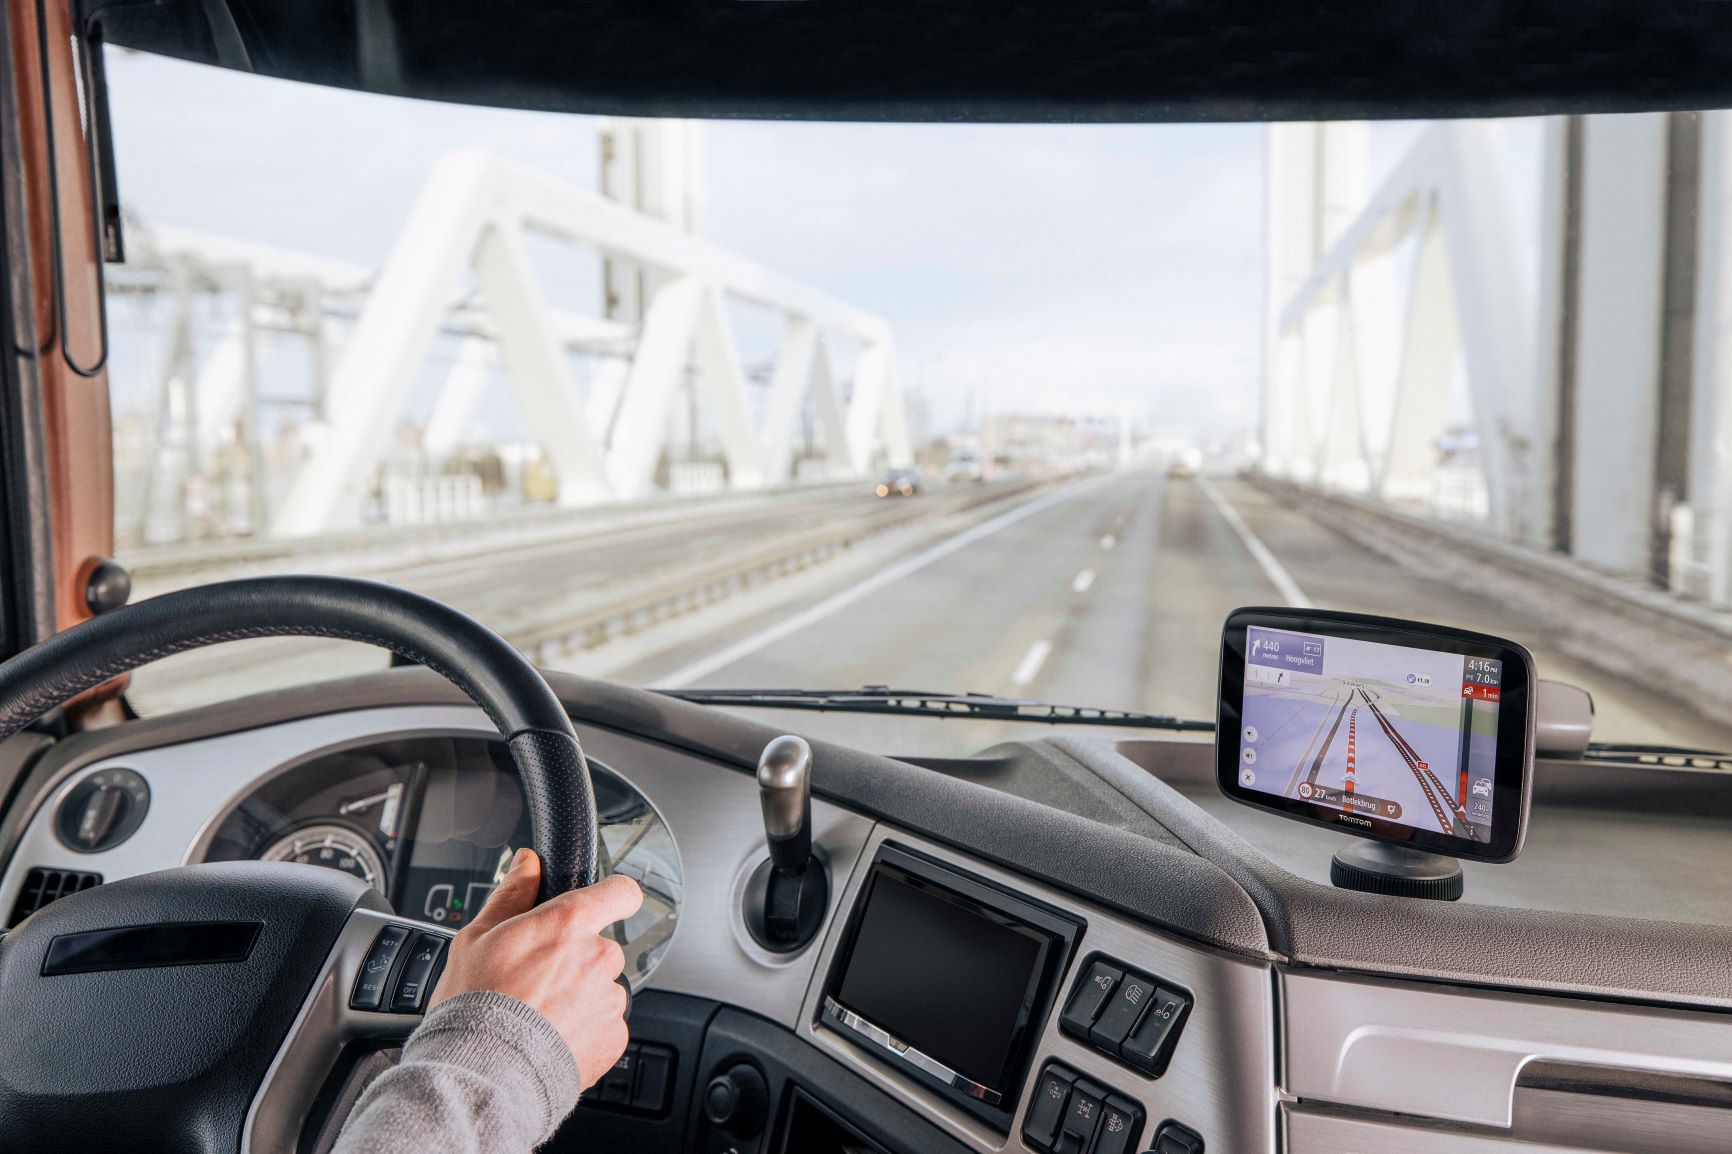 TomTom launches navigator specially designed for truck drivers - Just Auto